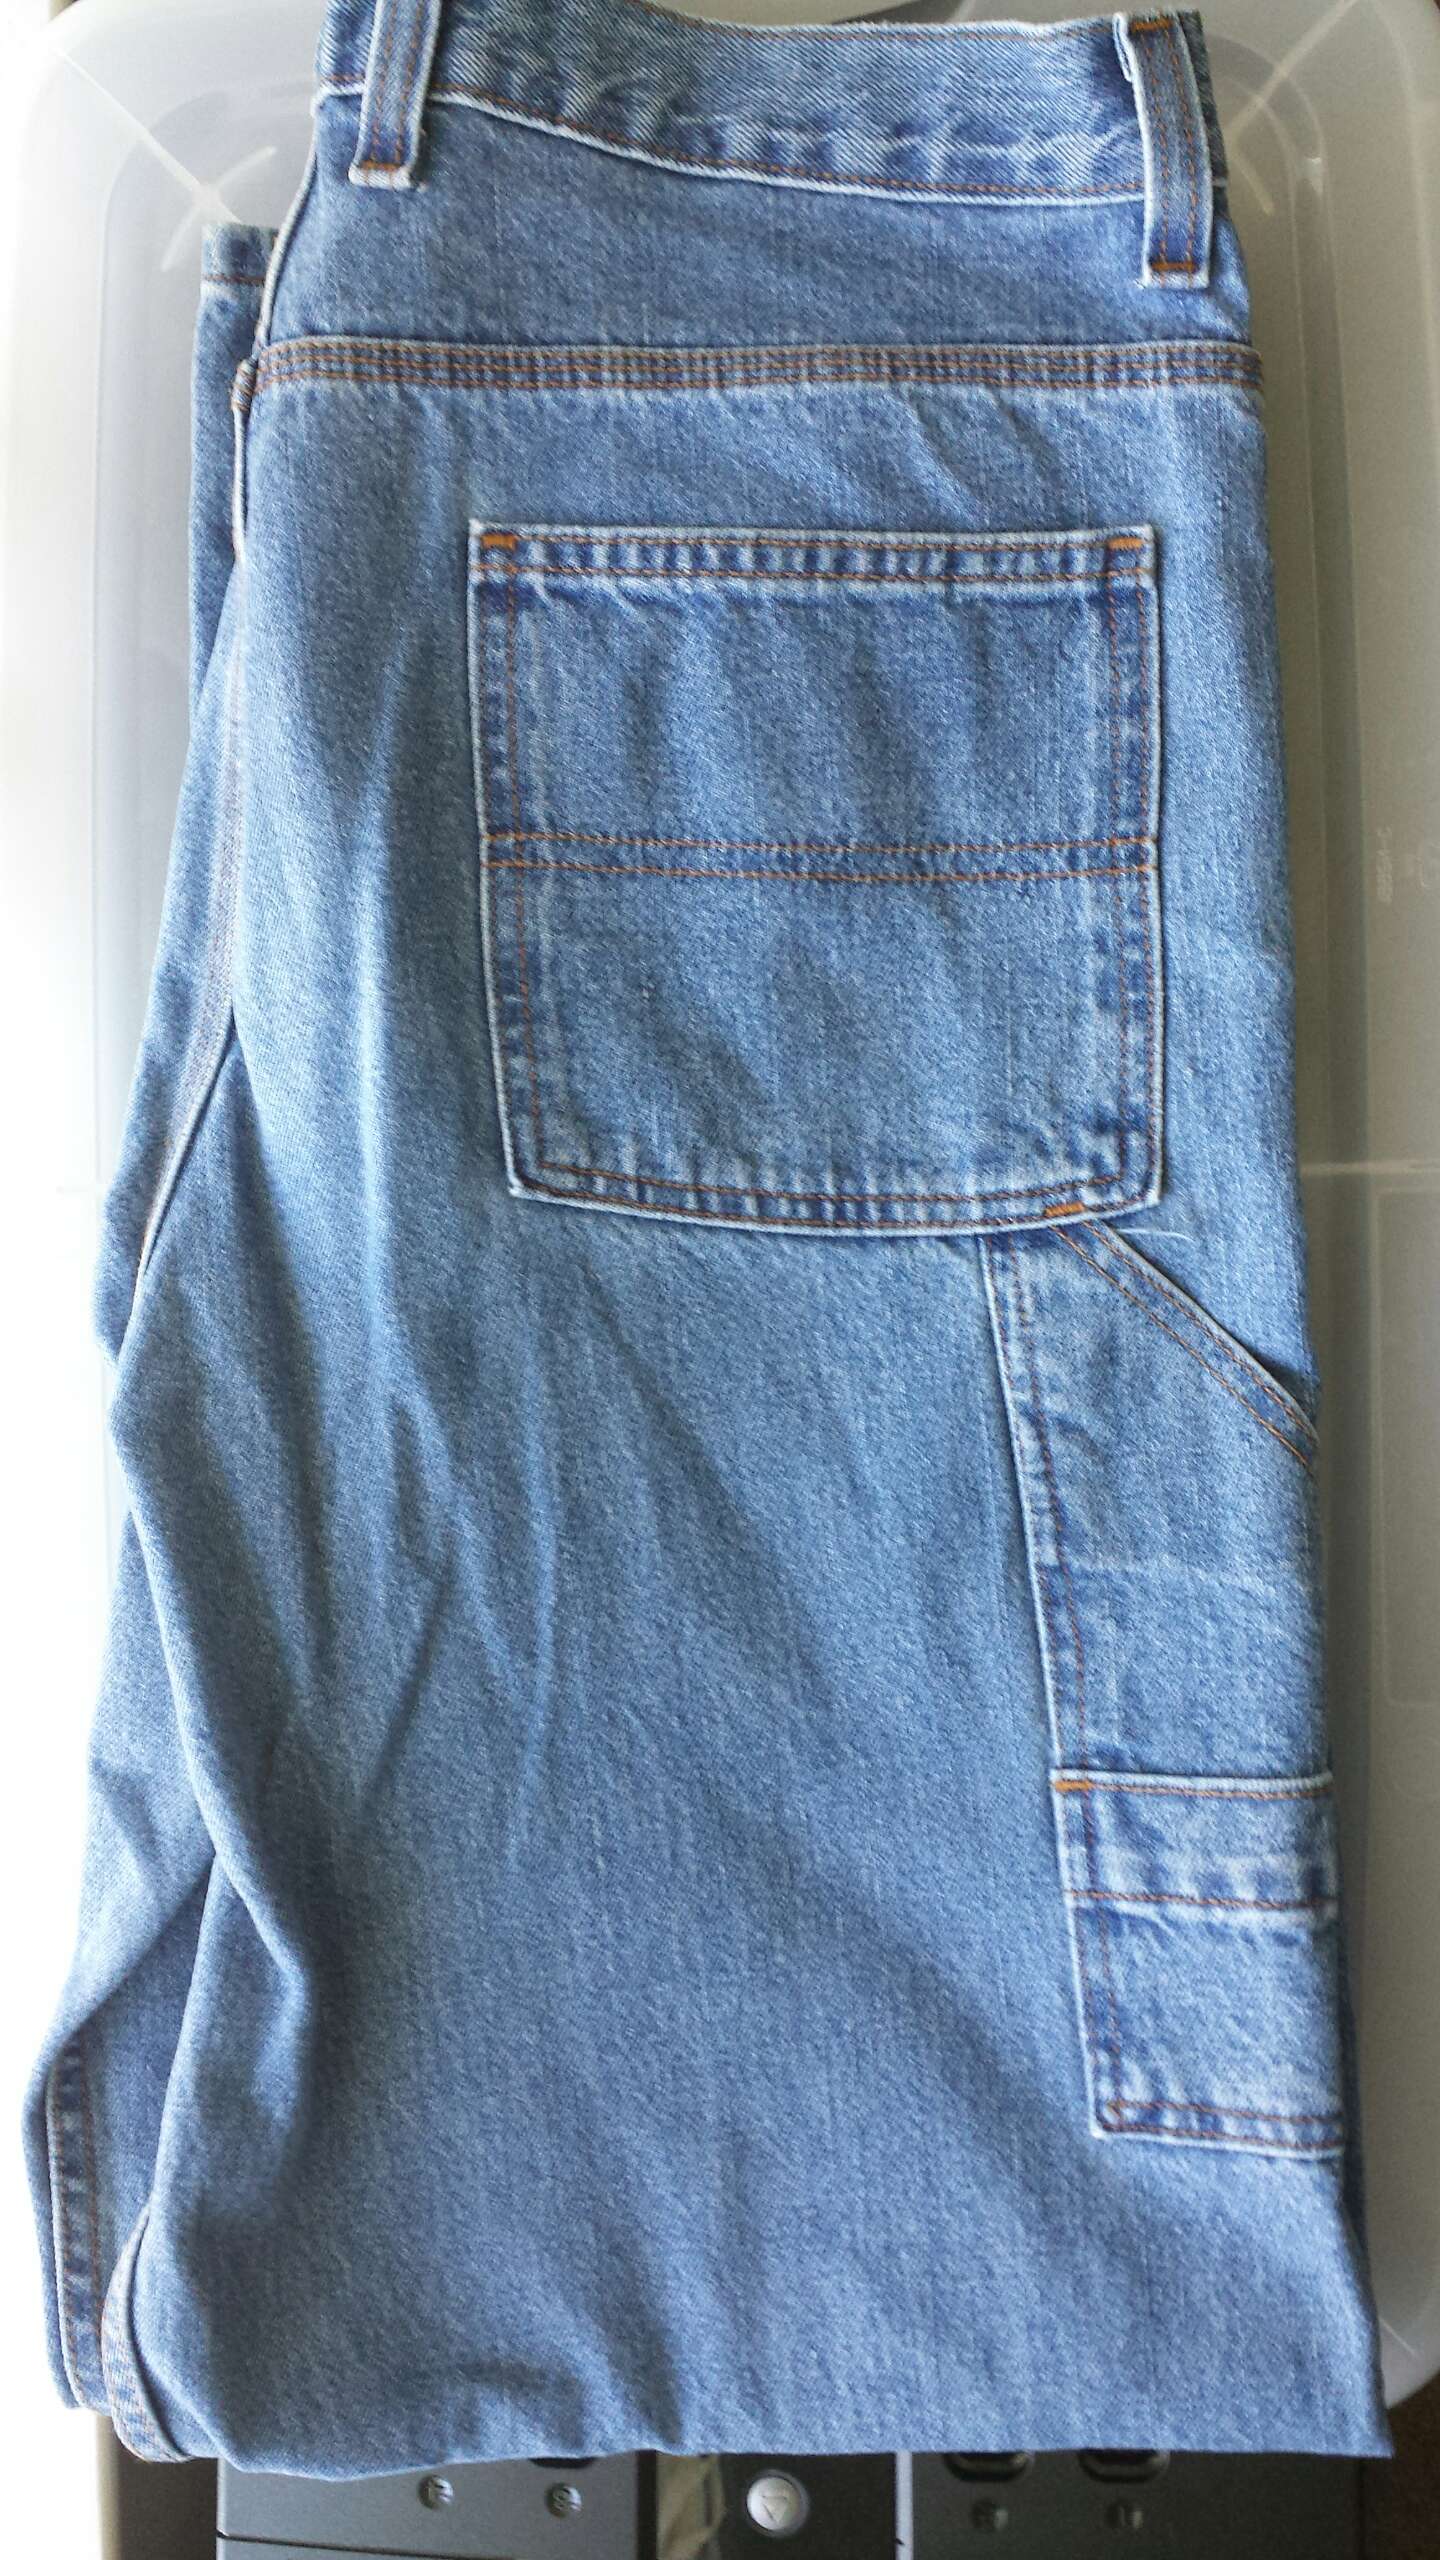 Men's Faded Glory Carpenter Jeans Size 36x34 for sale in Plano, TX ...